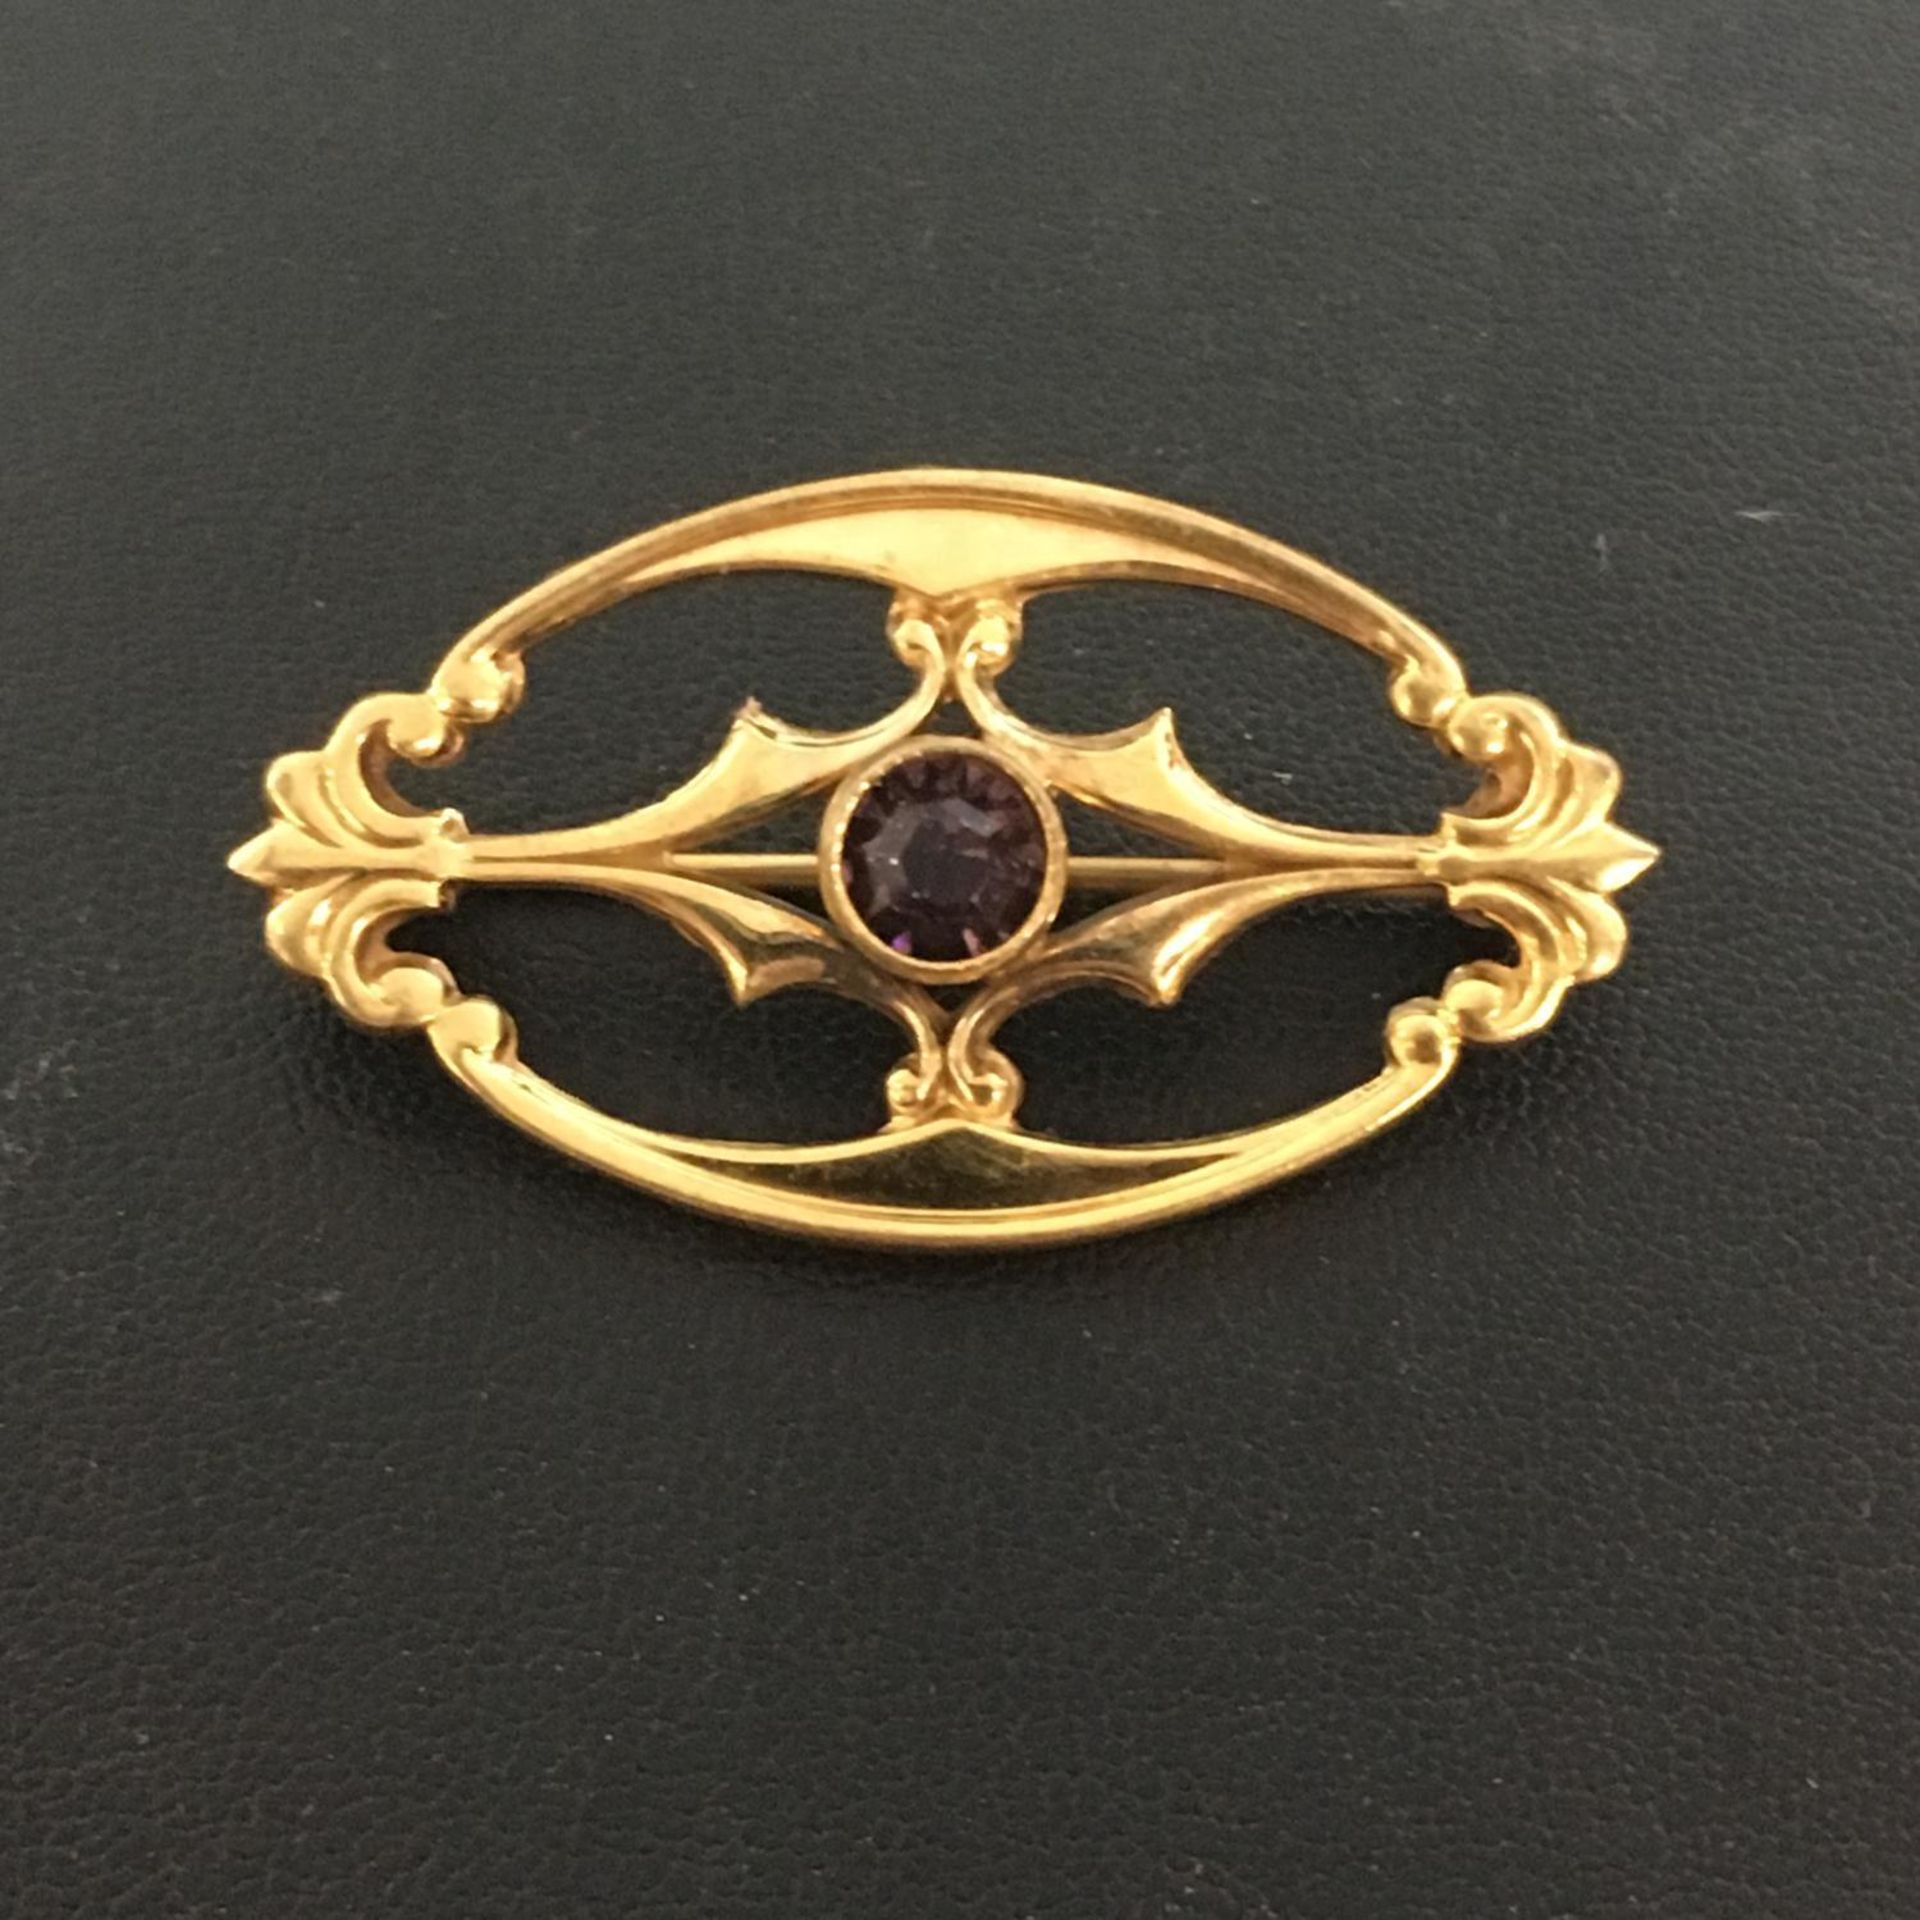 AMETHYST AND ROLLED GOLD BAR BROOCH. Oval shape with pretty detailing. The hammer price includes